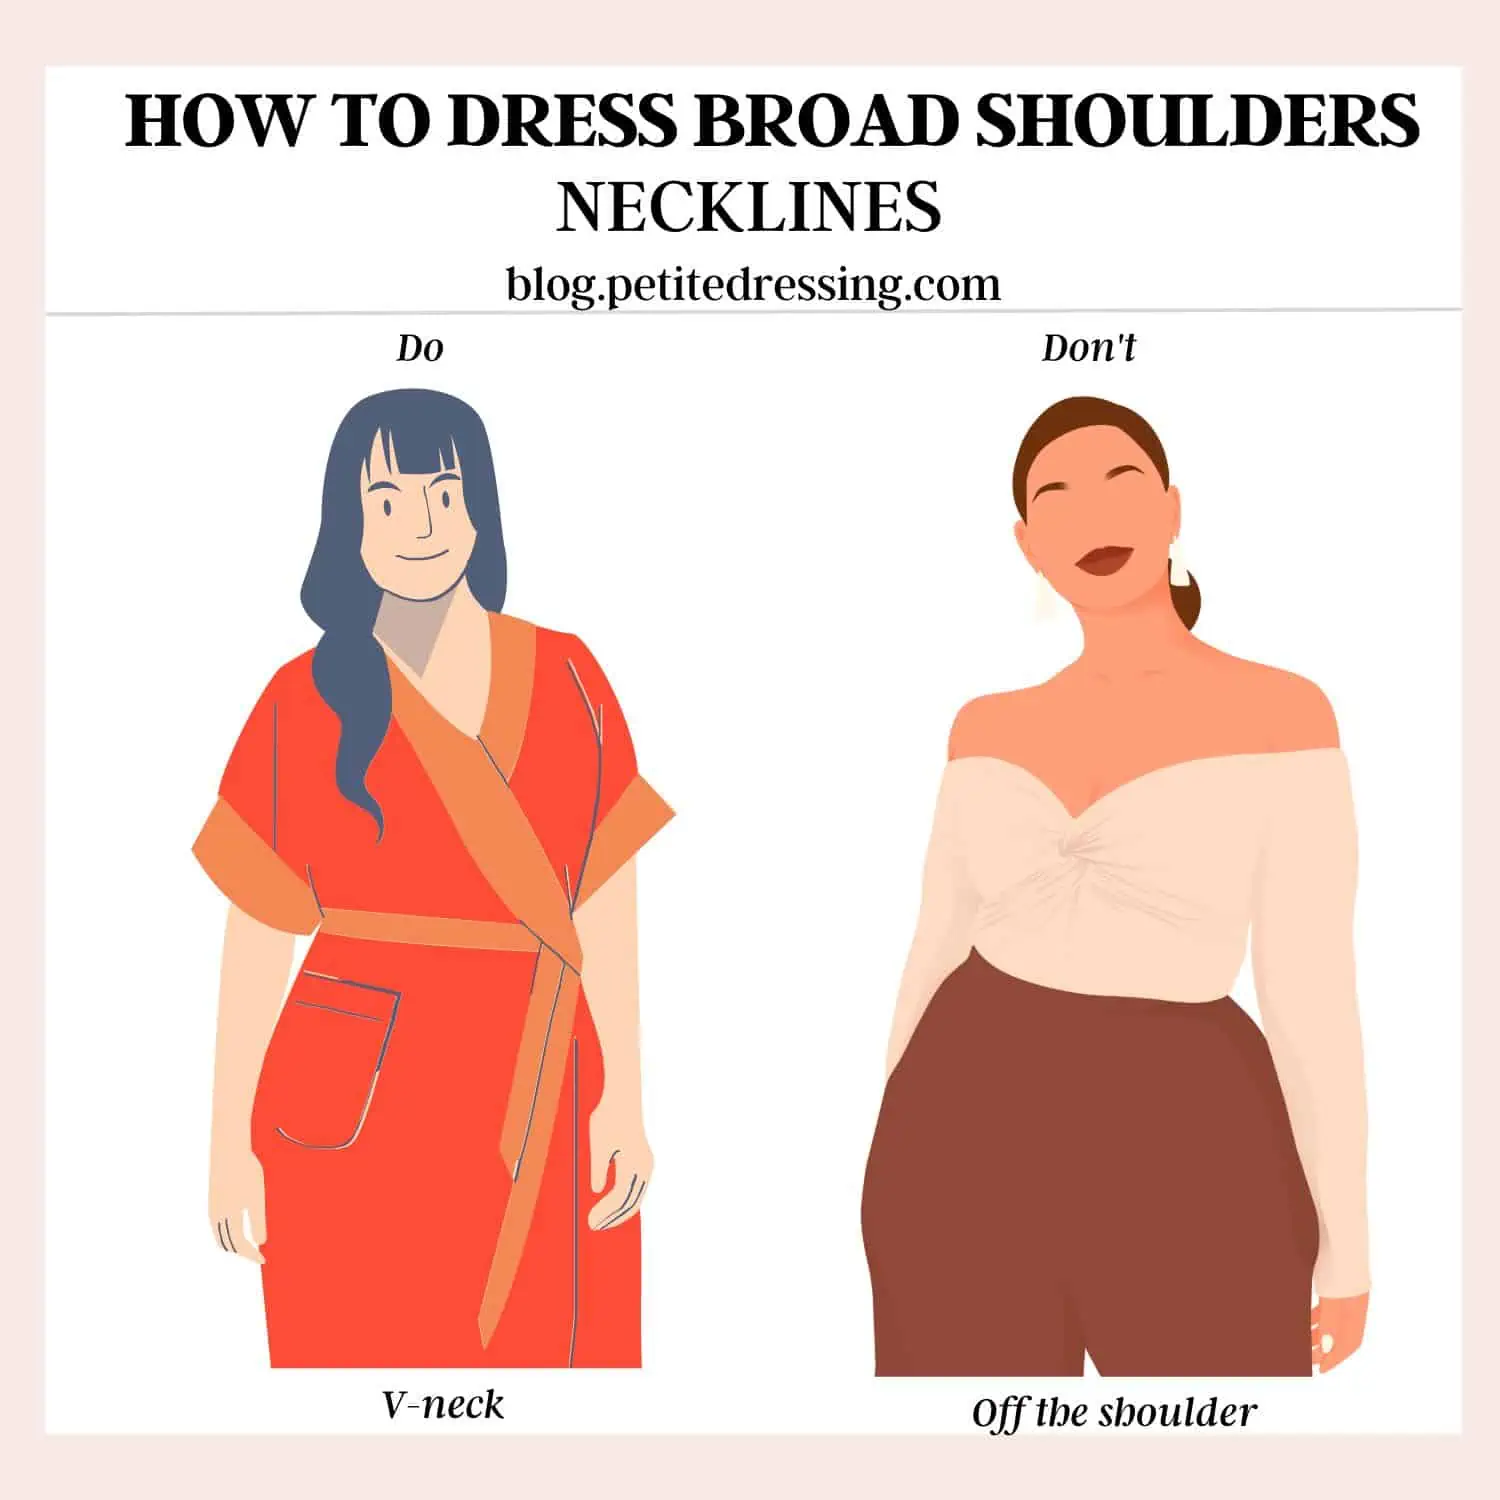 How to Dress Broad Shoulders: the Ultimate Guide - Petite Dressing